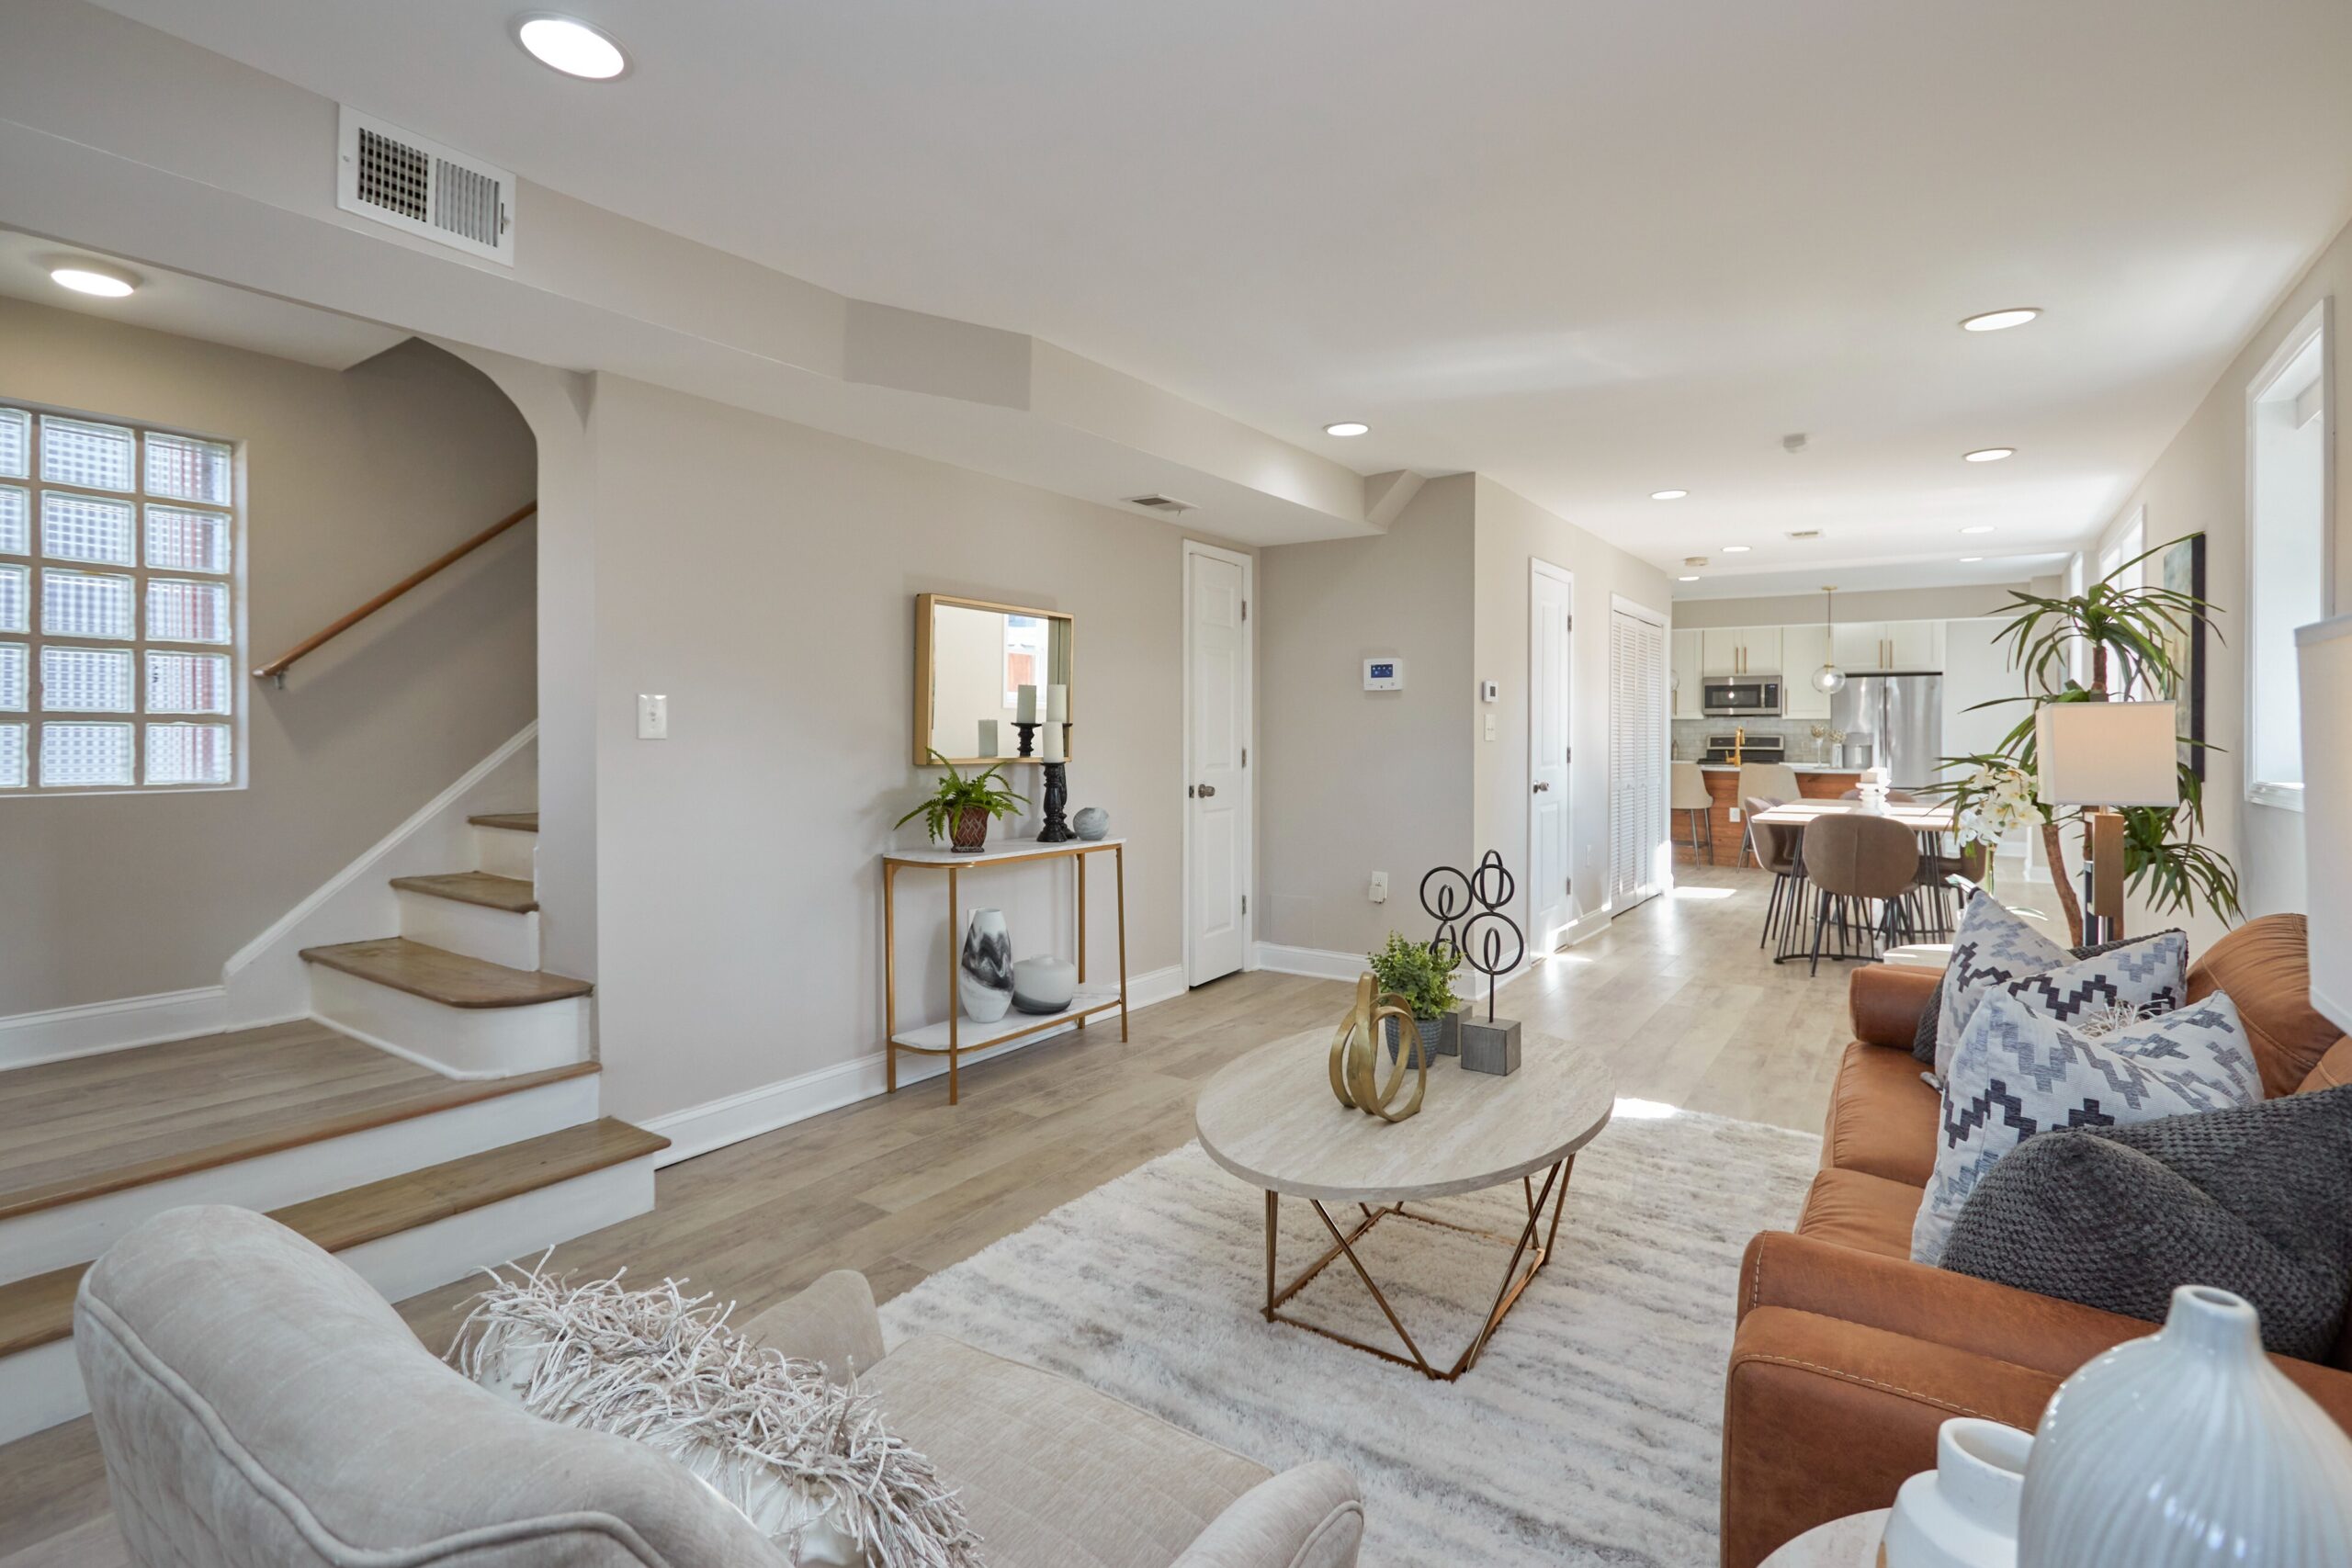 Professional interior photo of 1219 50th St NE in Washington, DC - showing the living room that flows openly back through the dining room to the kitchen and a staircase at the front leading to the second floor